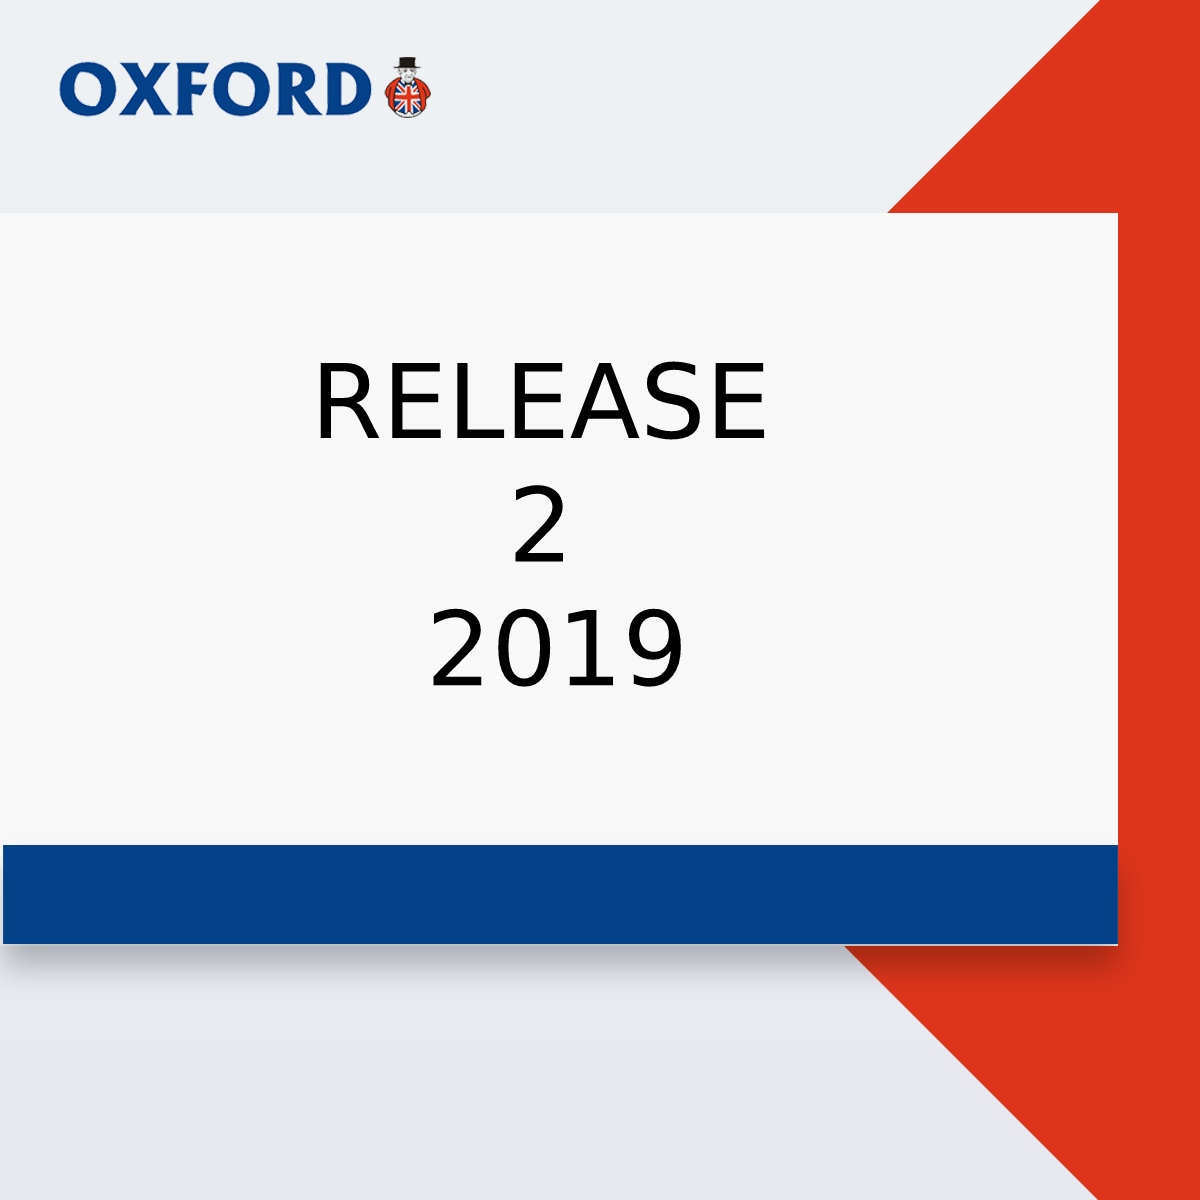 Release 2 2019